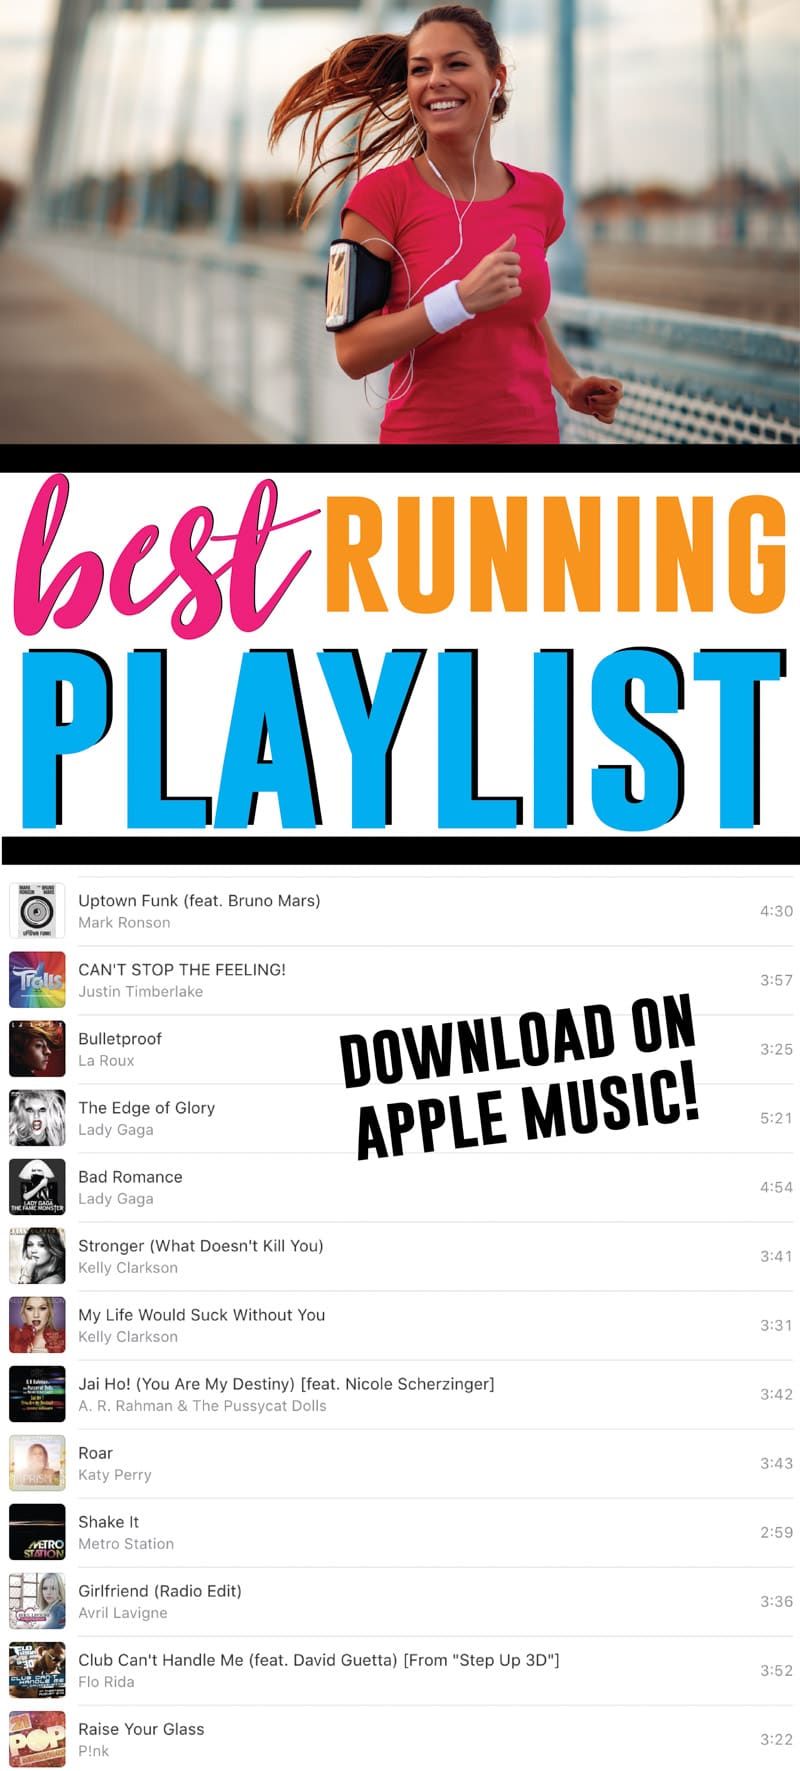 The ultimate upbeat running playlist! Full of everything from country to rock and the best hip hop and pop songs from the 90s all the way to 2019! The best motivational songs that’ll have you wanting to run fast! Get the Apple Music playlist now!